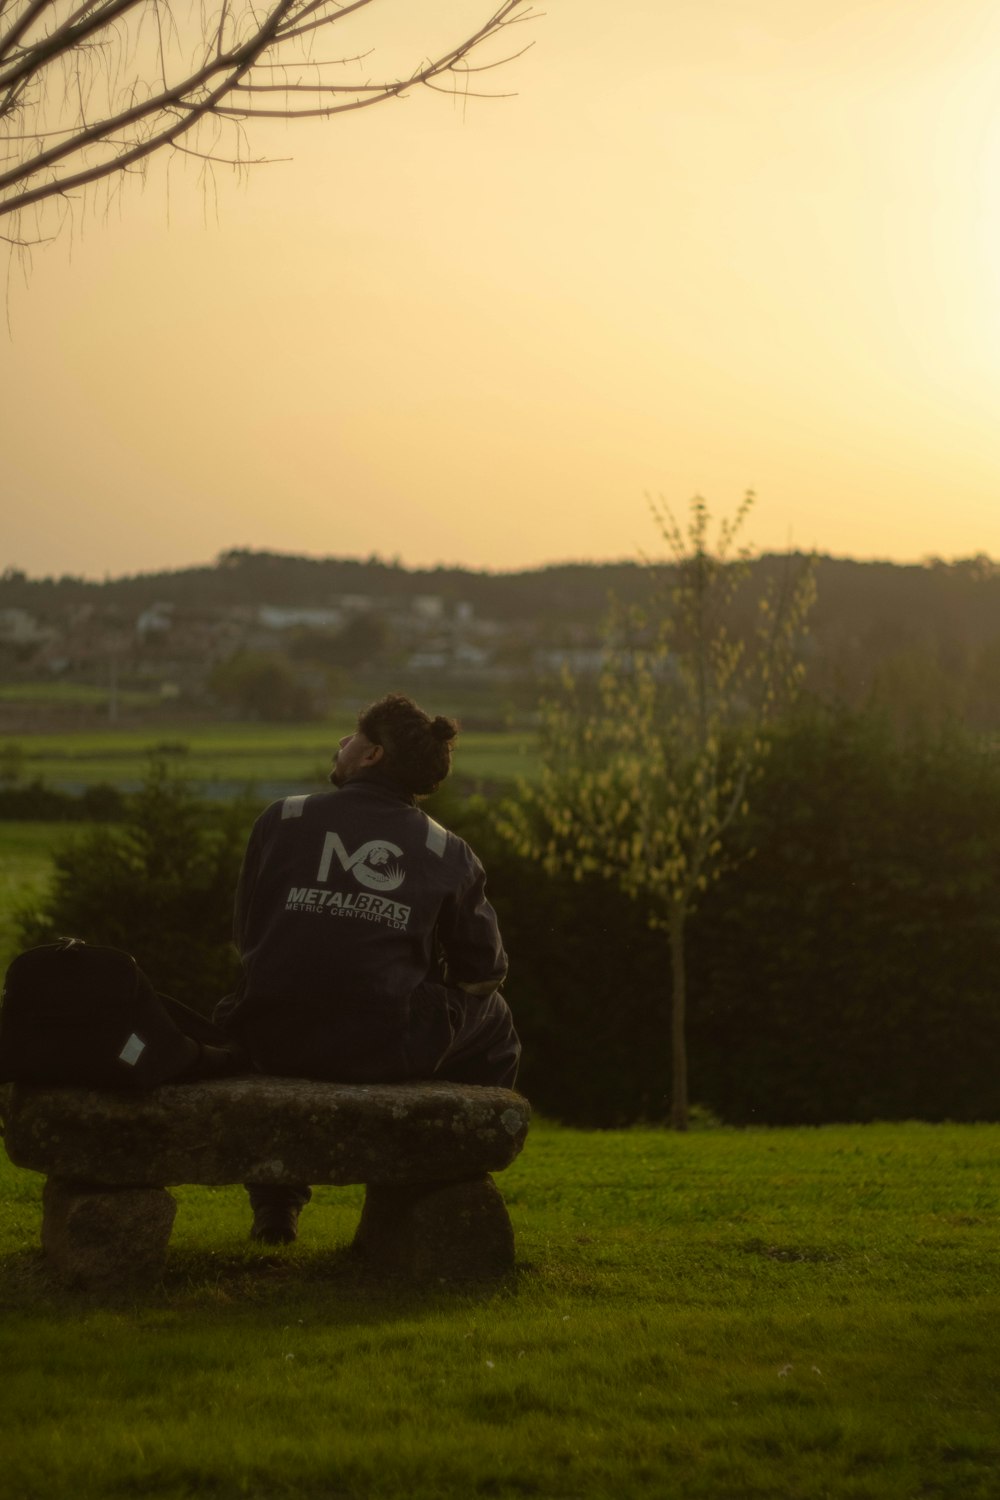 a person sitting on a bench in a field